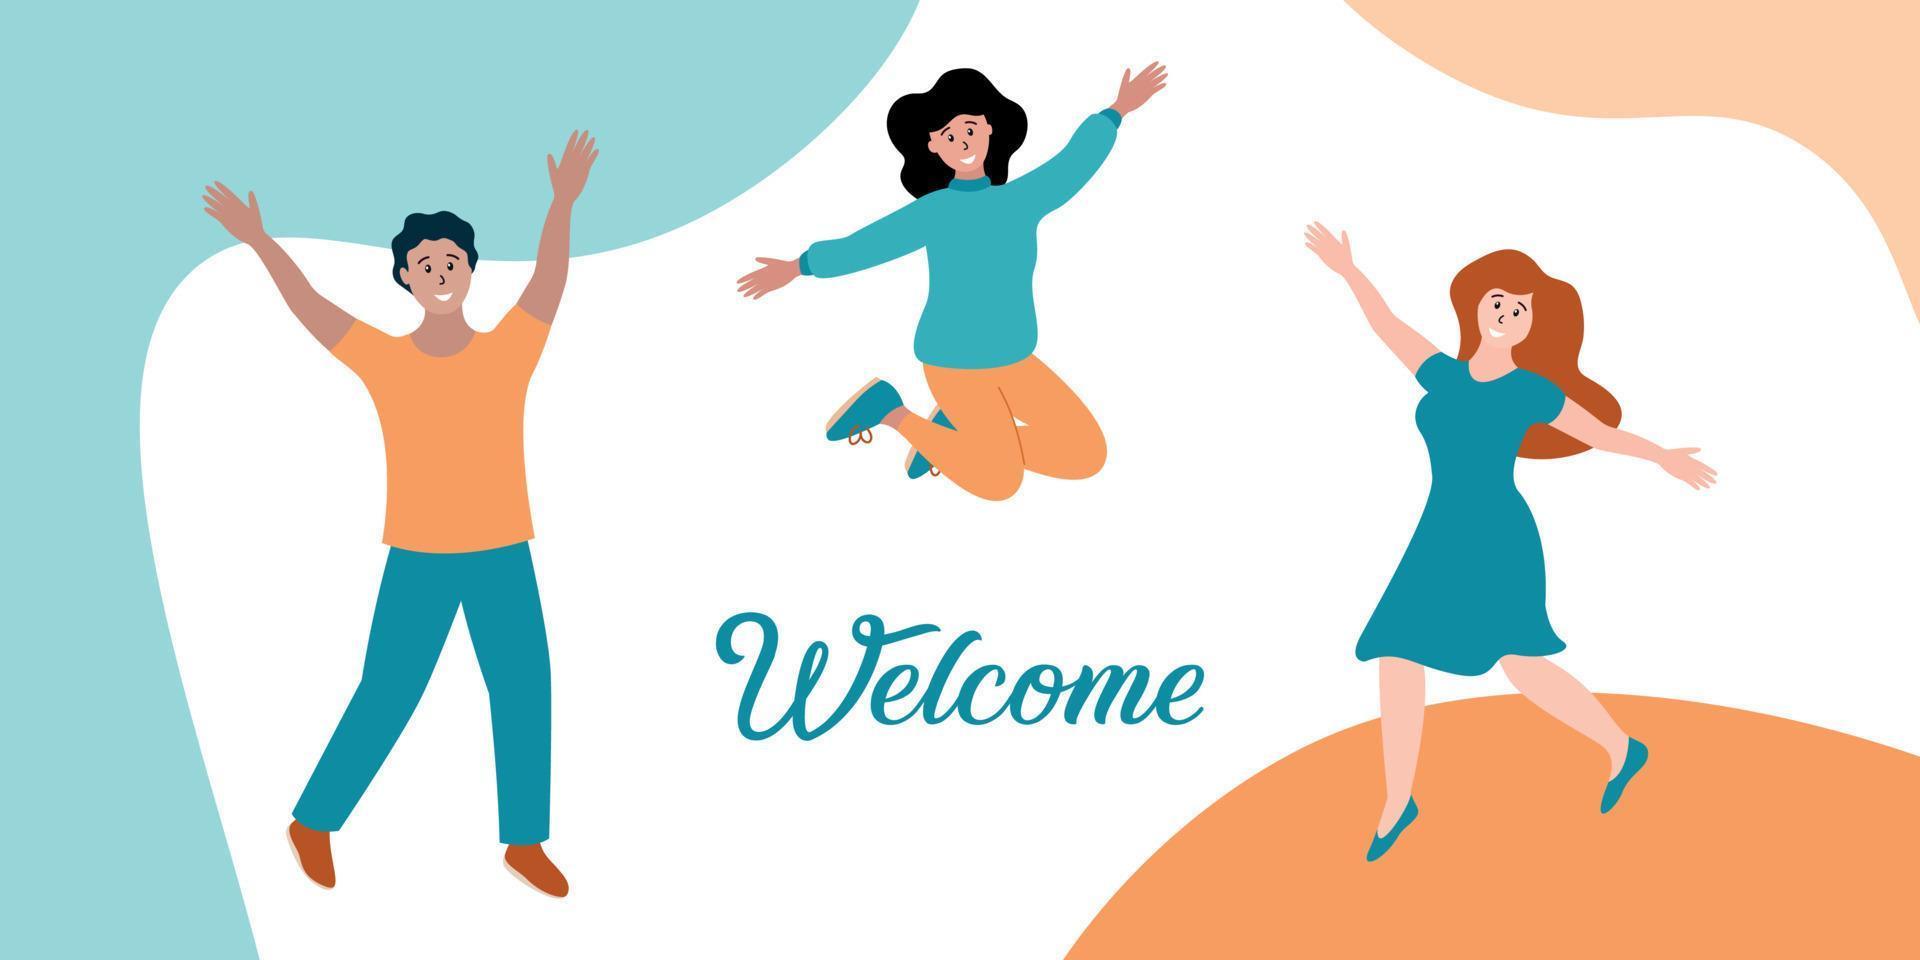 Welcome banner. Happy young people jumping and smiling. Friends together. Horizontal banner for website with text Welcome. Vector illustration